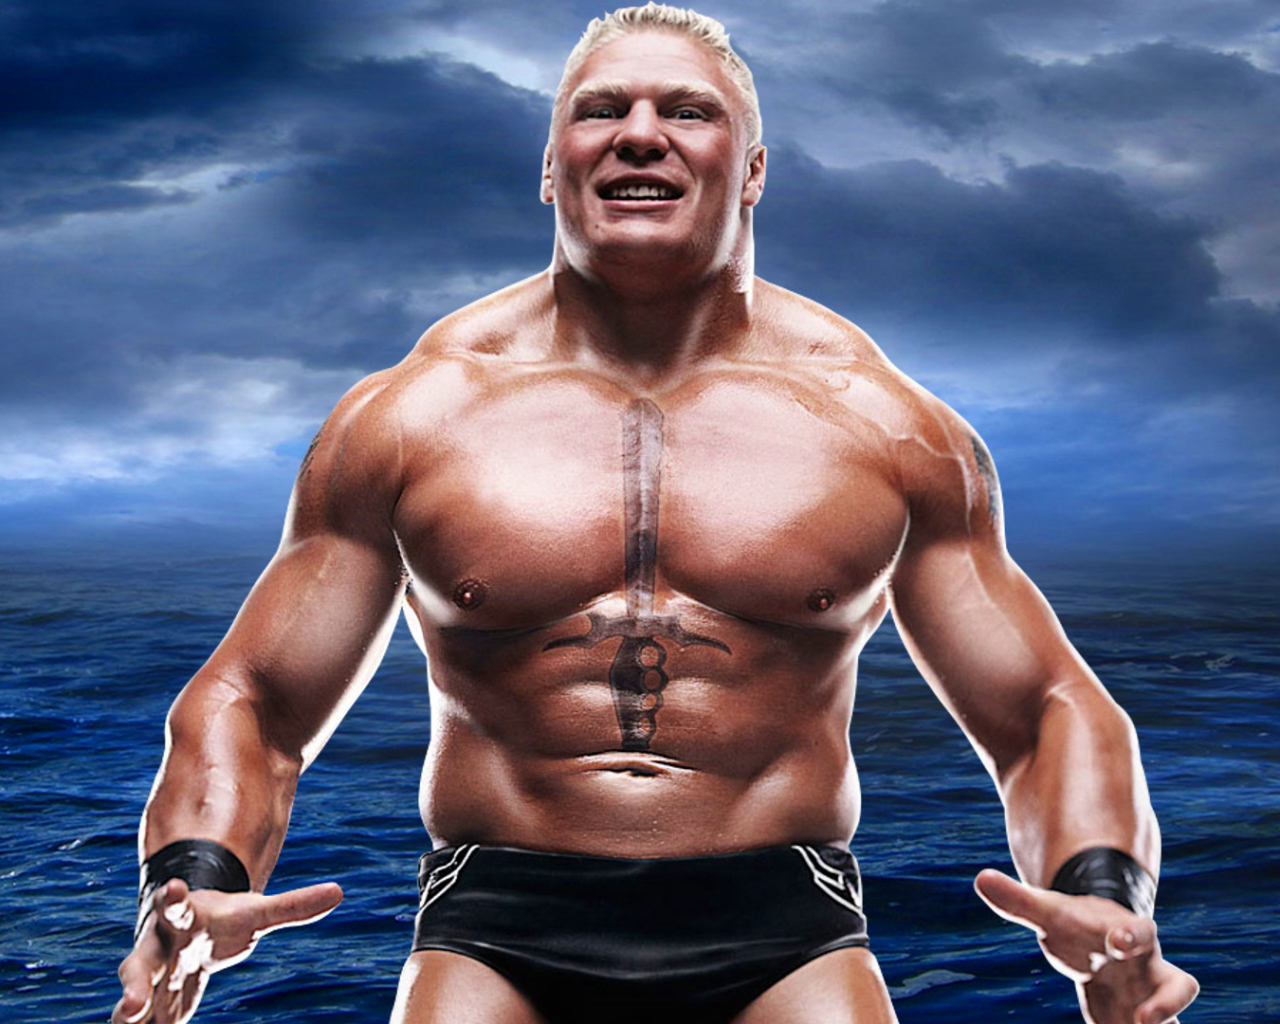 Free download Brock Lesnar WWE Wallpaper 40926815 [1280x1024] for your